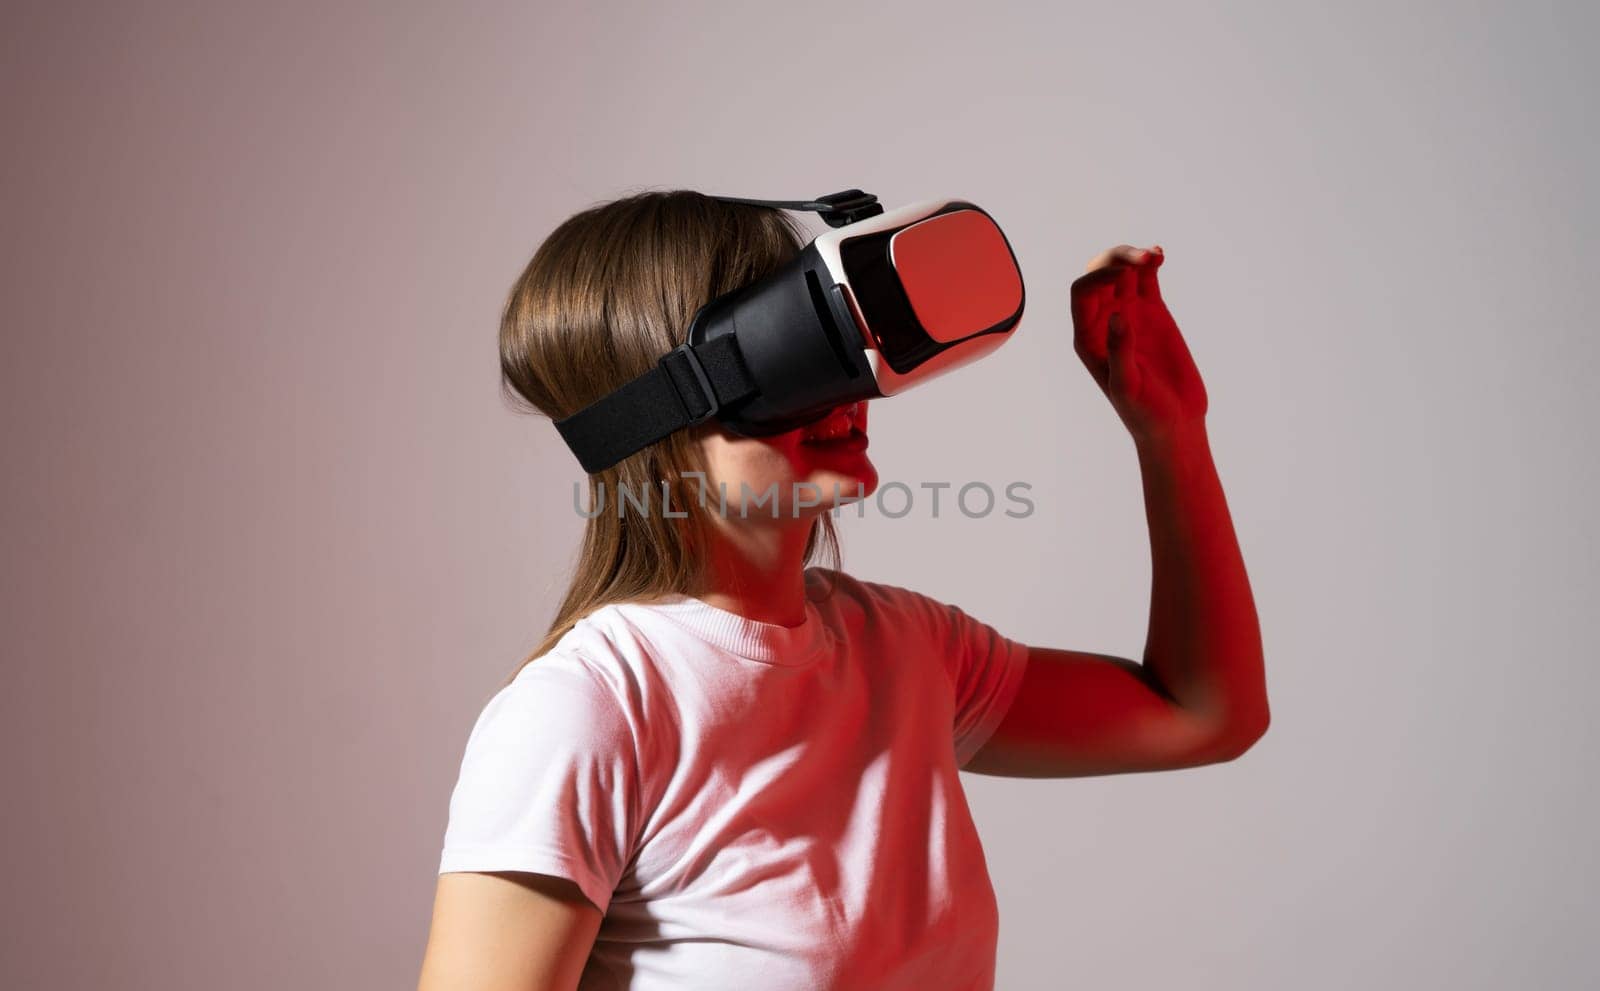 Woman gamer in white t-shirt wearing virtual reality headset and playing a video games with a friend's and gesturing with a hands in a red light. Future gaming concept